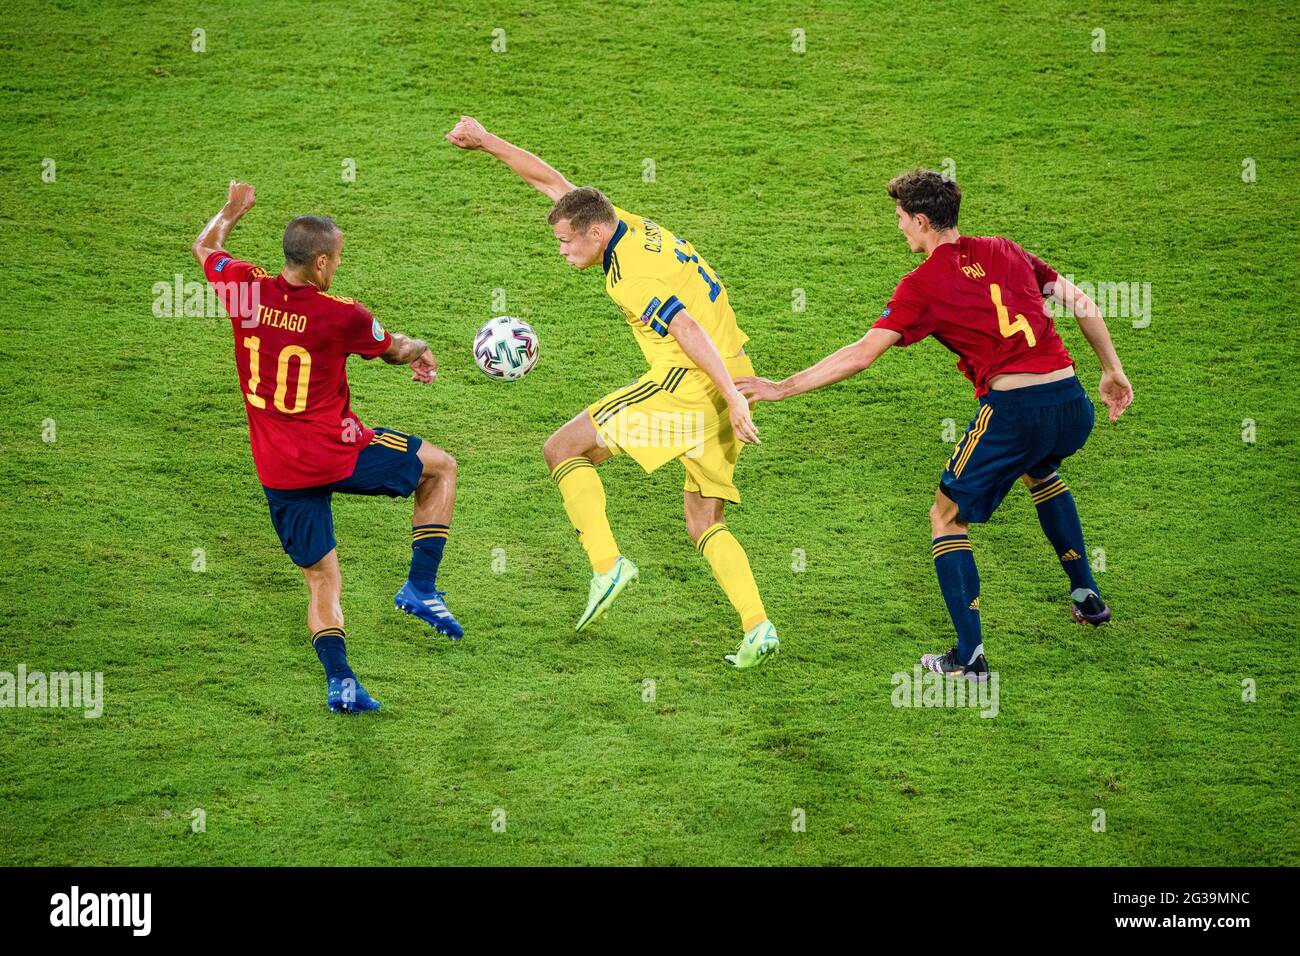 Seville, Spain. 14th June, 2021. Pau Torres (R) and Thiago Alcantara (L) of Spain compete with Viktor Claesson of Sweden during the UEFA Euro 2020 Championship Group E match in Seville, Spain, June 14, 2021. Credit: Joan Gosa/Xinhua/Alamy Live News Stock Photo